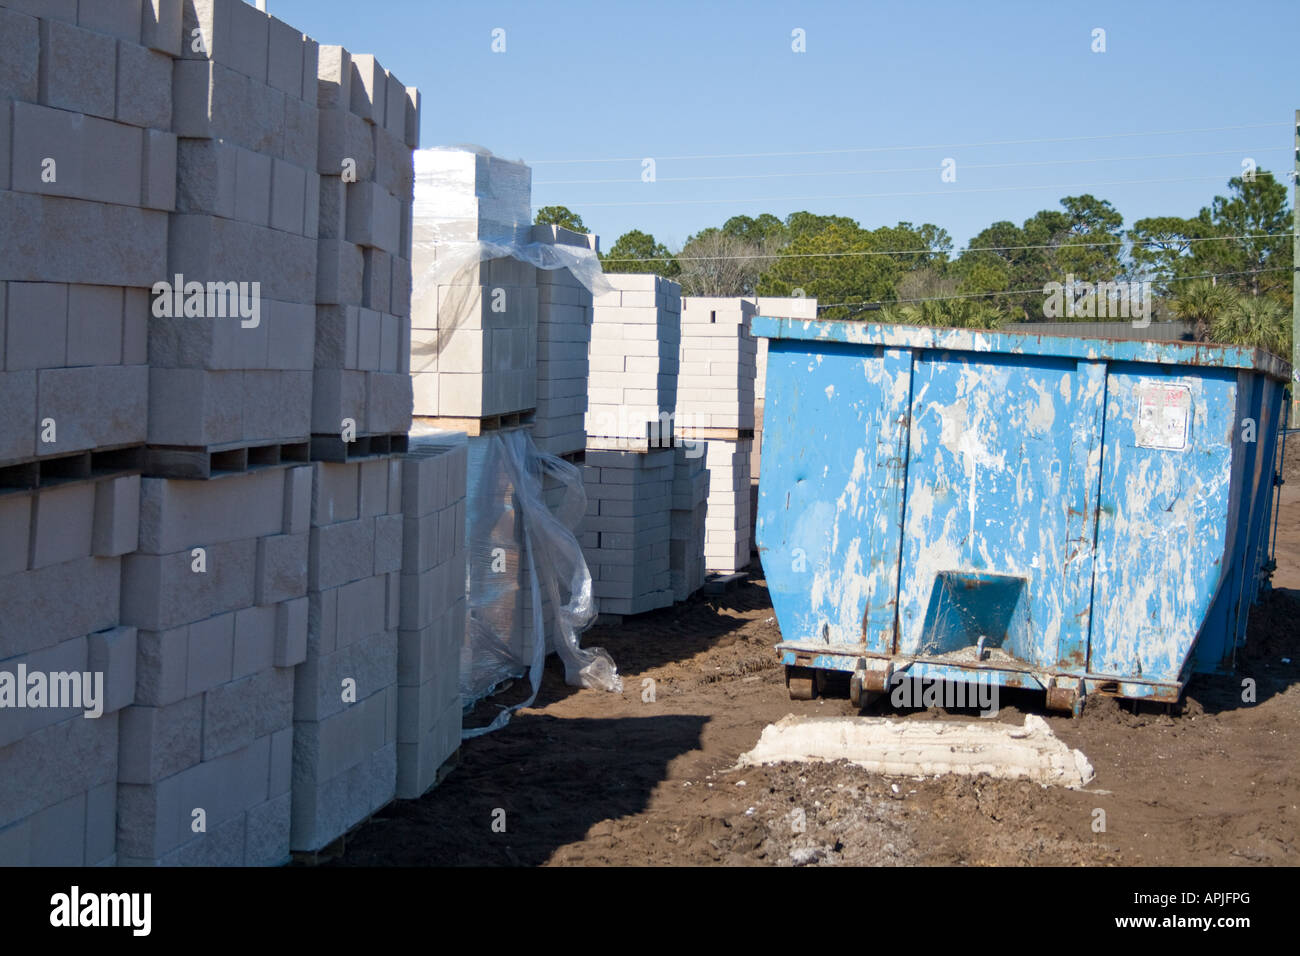 White brick construction material and a dumpster. Stock Photo